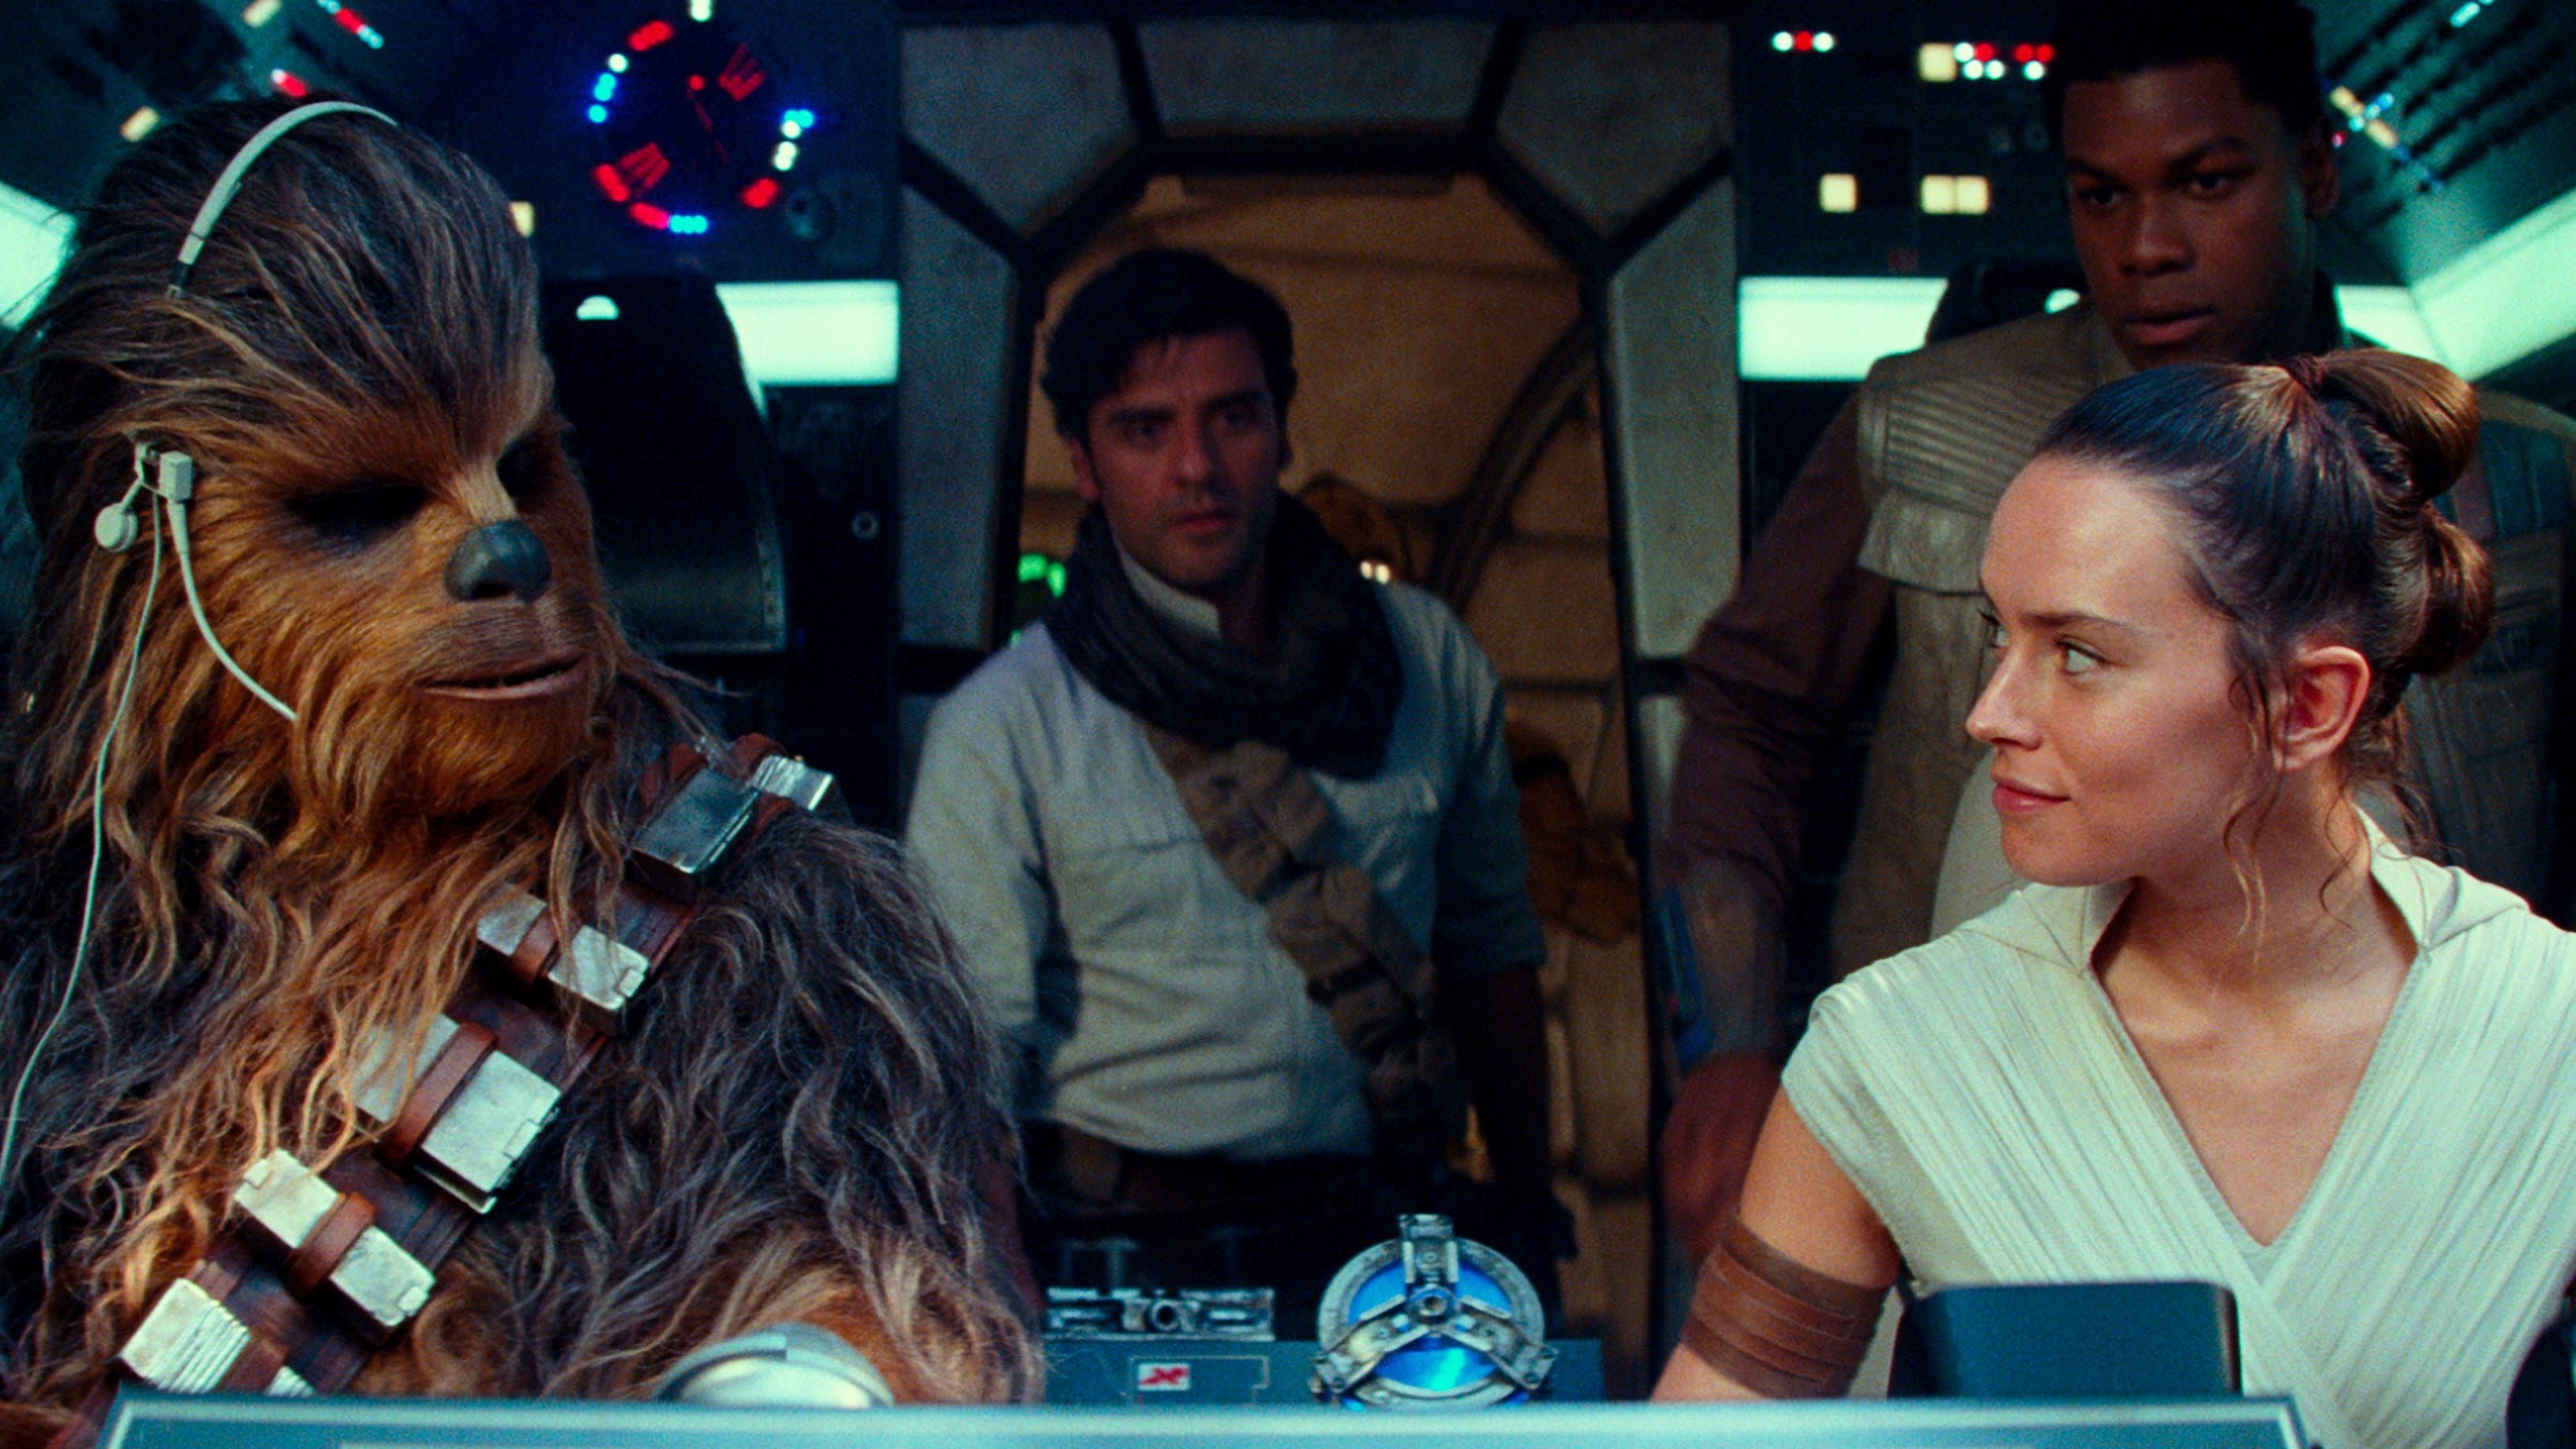 Star Wars' has strong first night but falls short compared to previous  movies